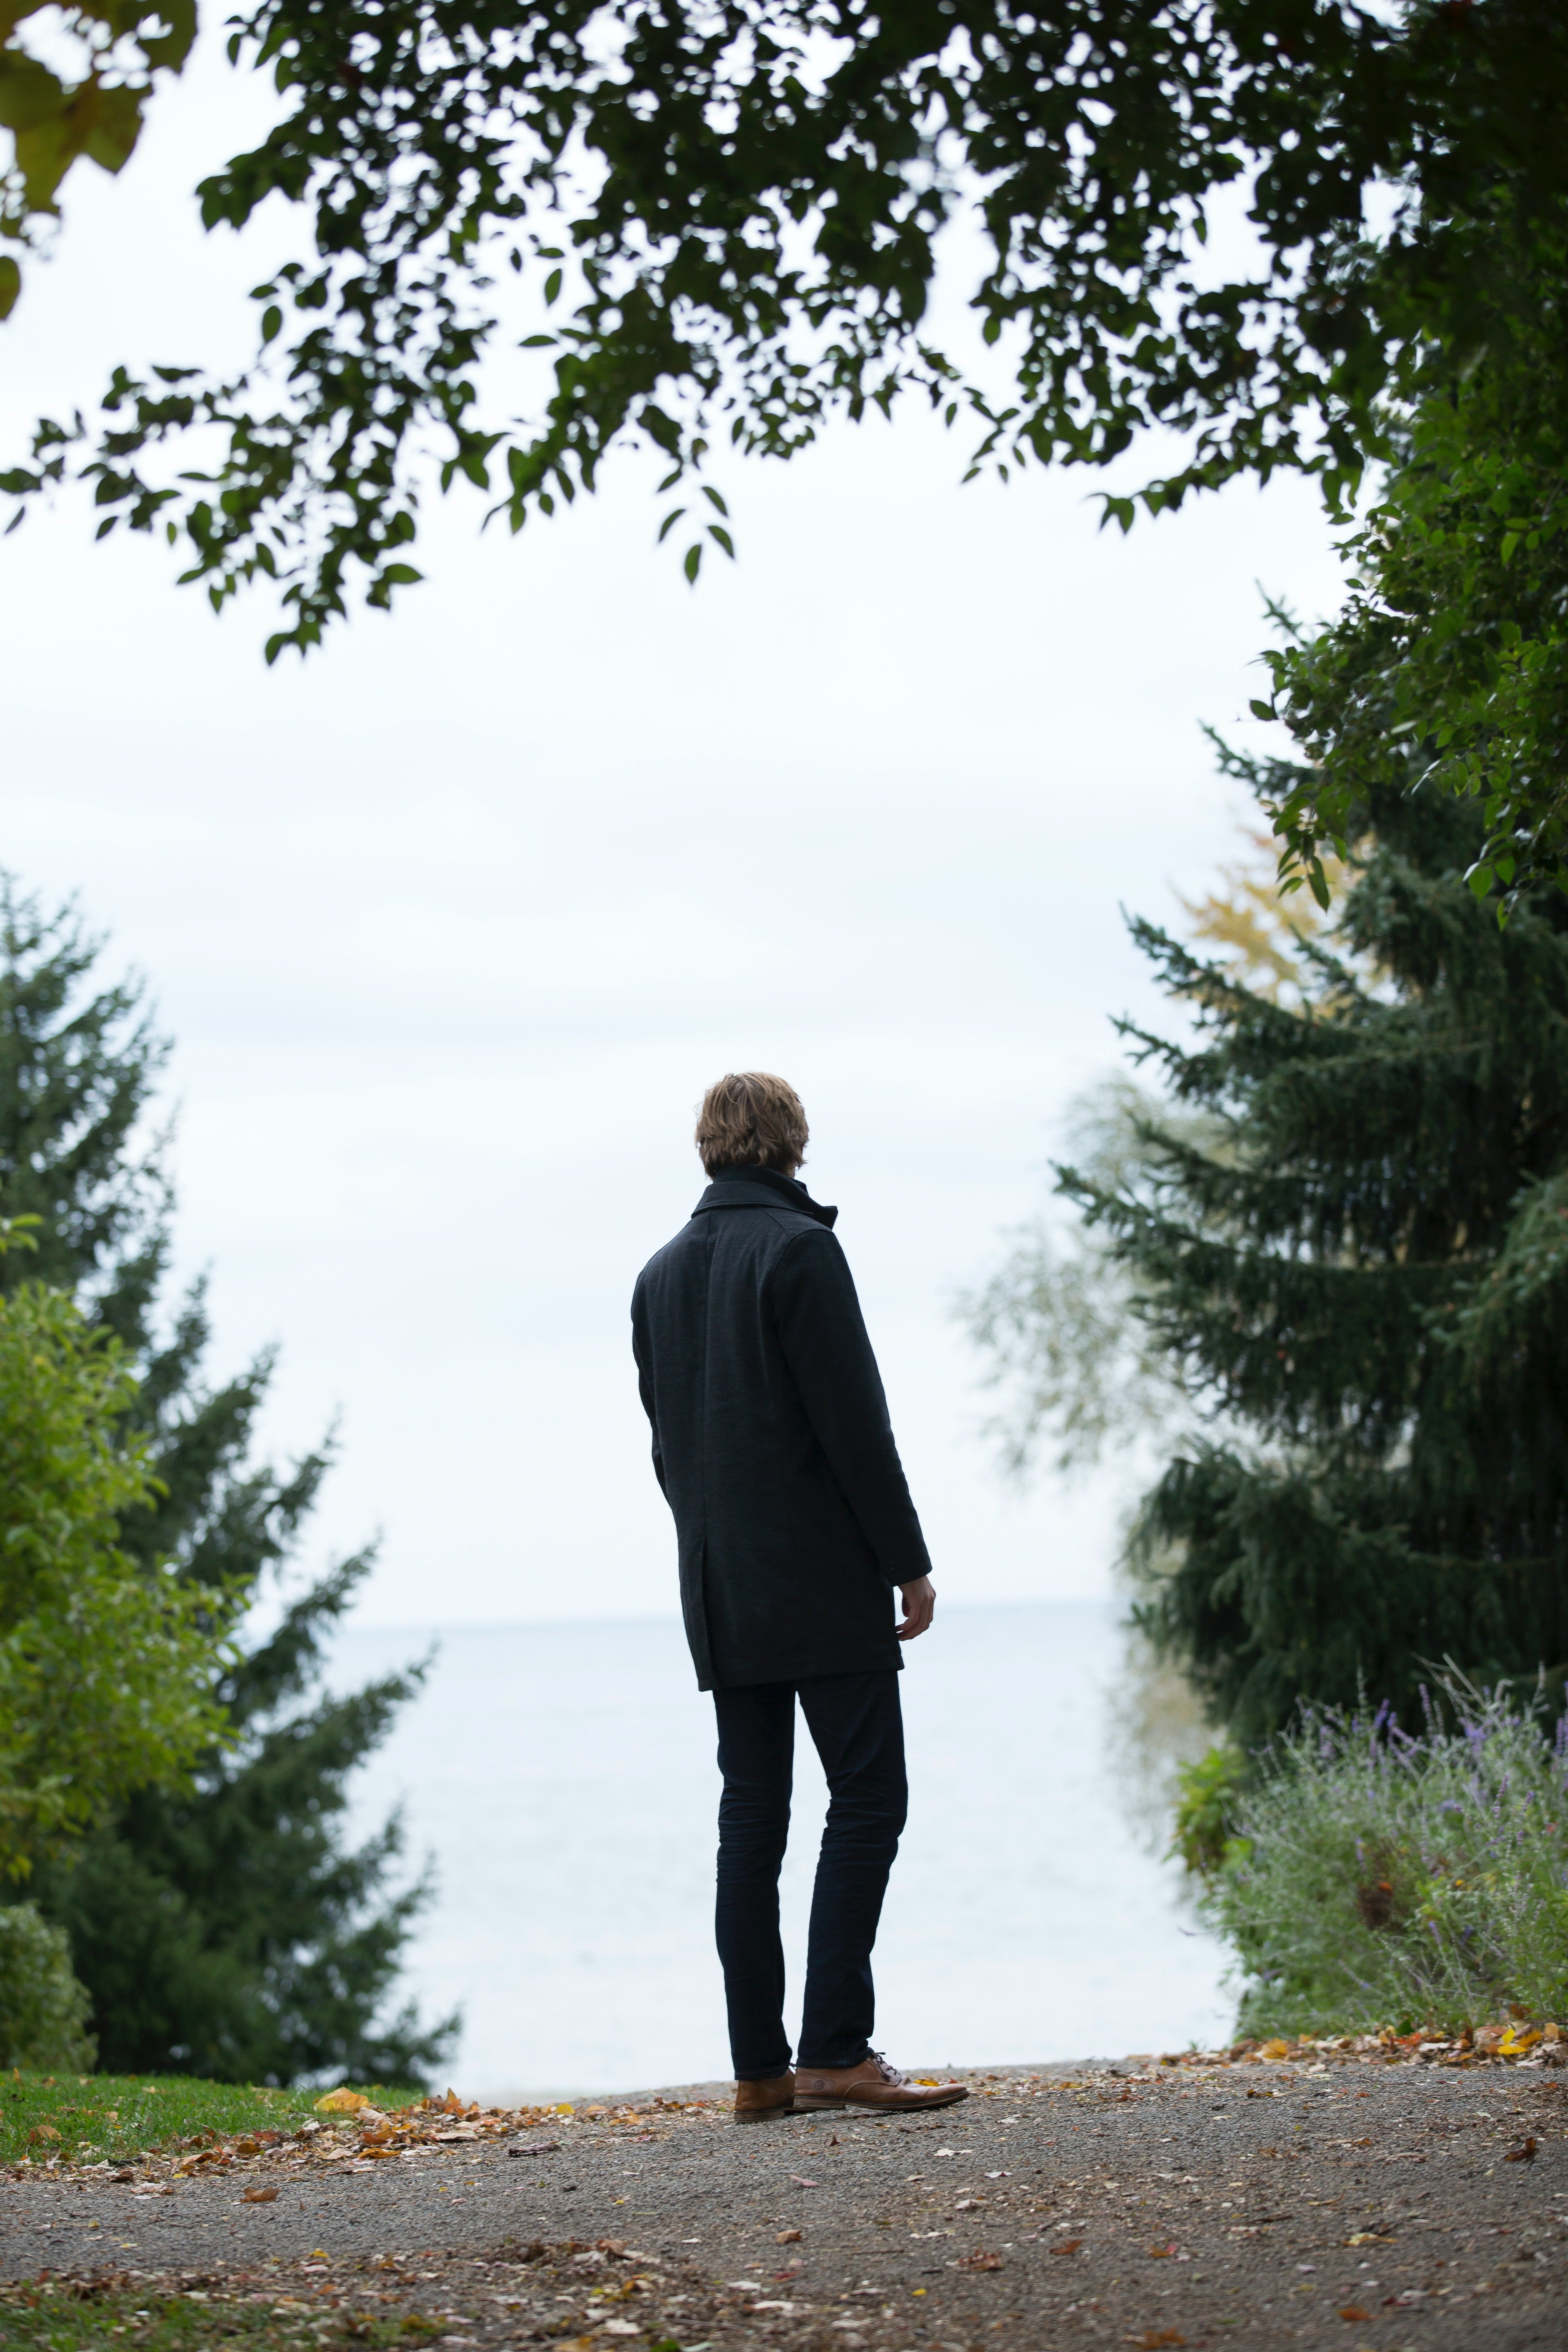 David went for a walk to think of what he should do next. | Source: Pexel